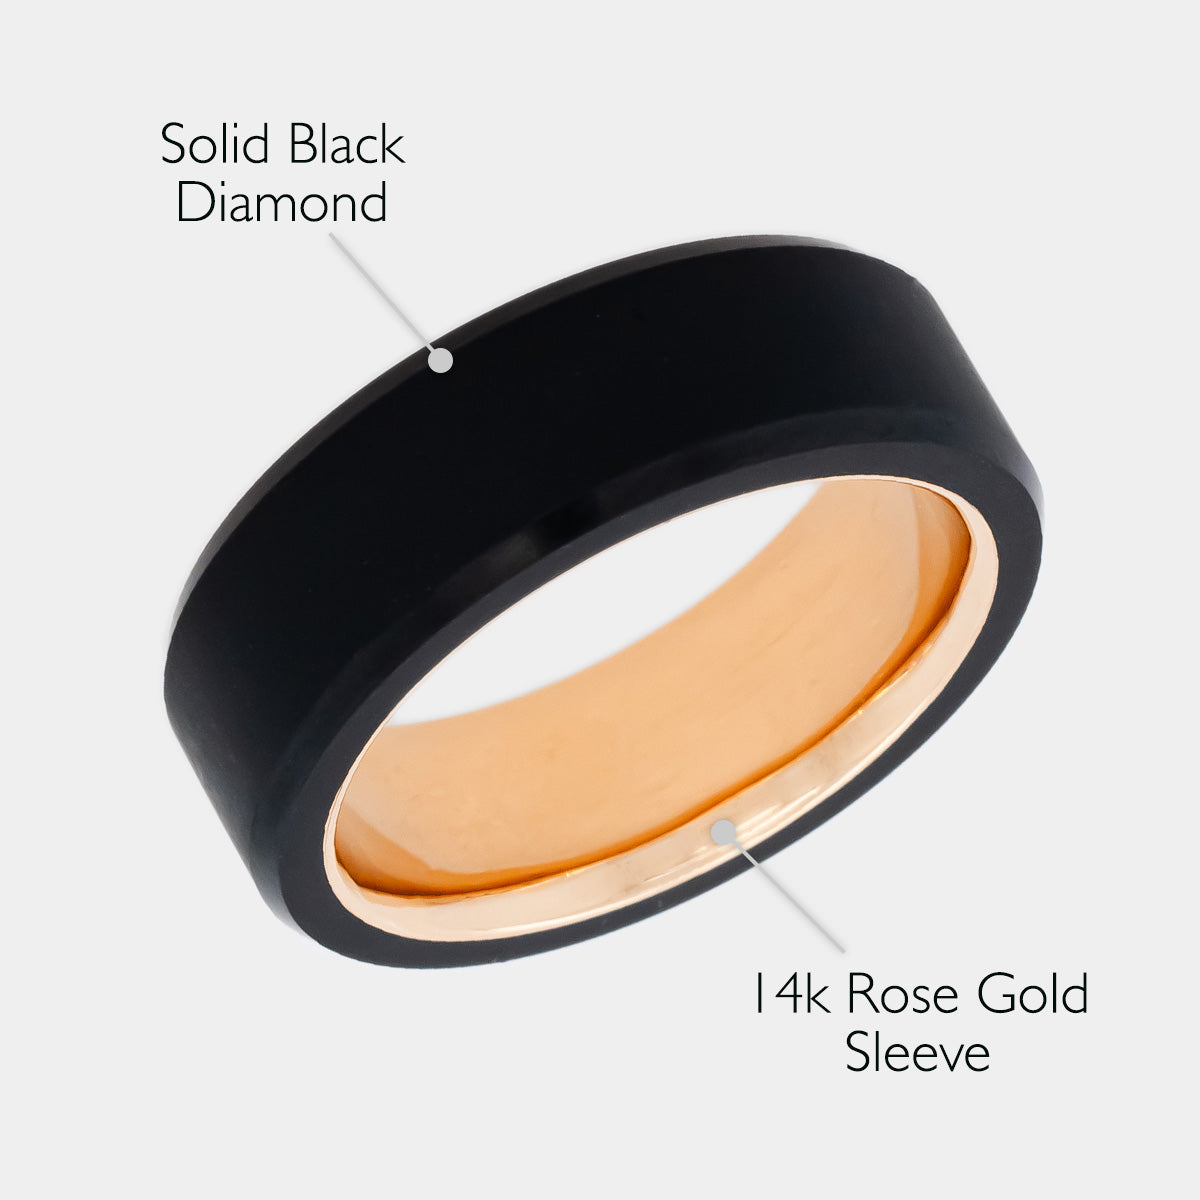 ARES 8mm - Size 10 - Matte Finish 14k Rose Gold Sleeve - SHIPS WITHIN 2 BUSINESS DAYS